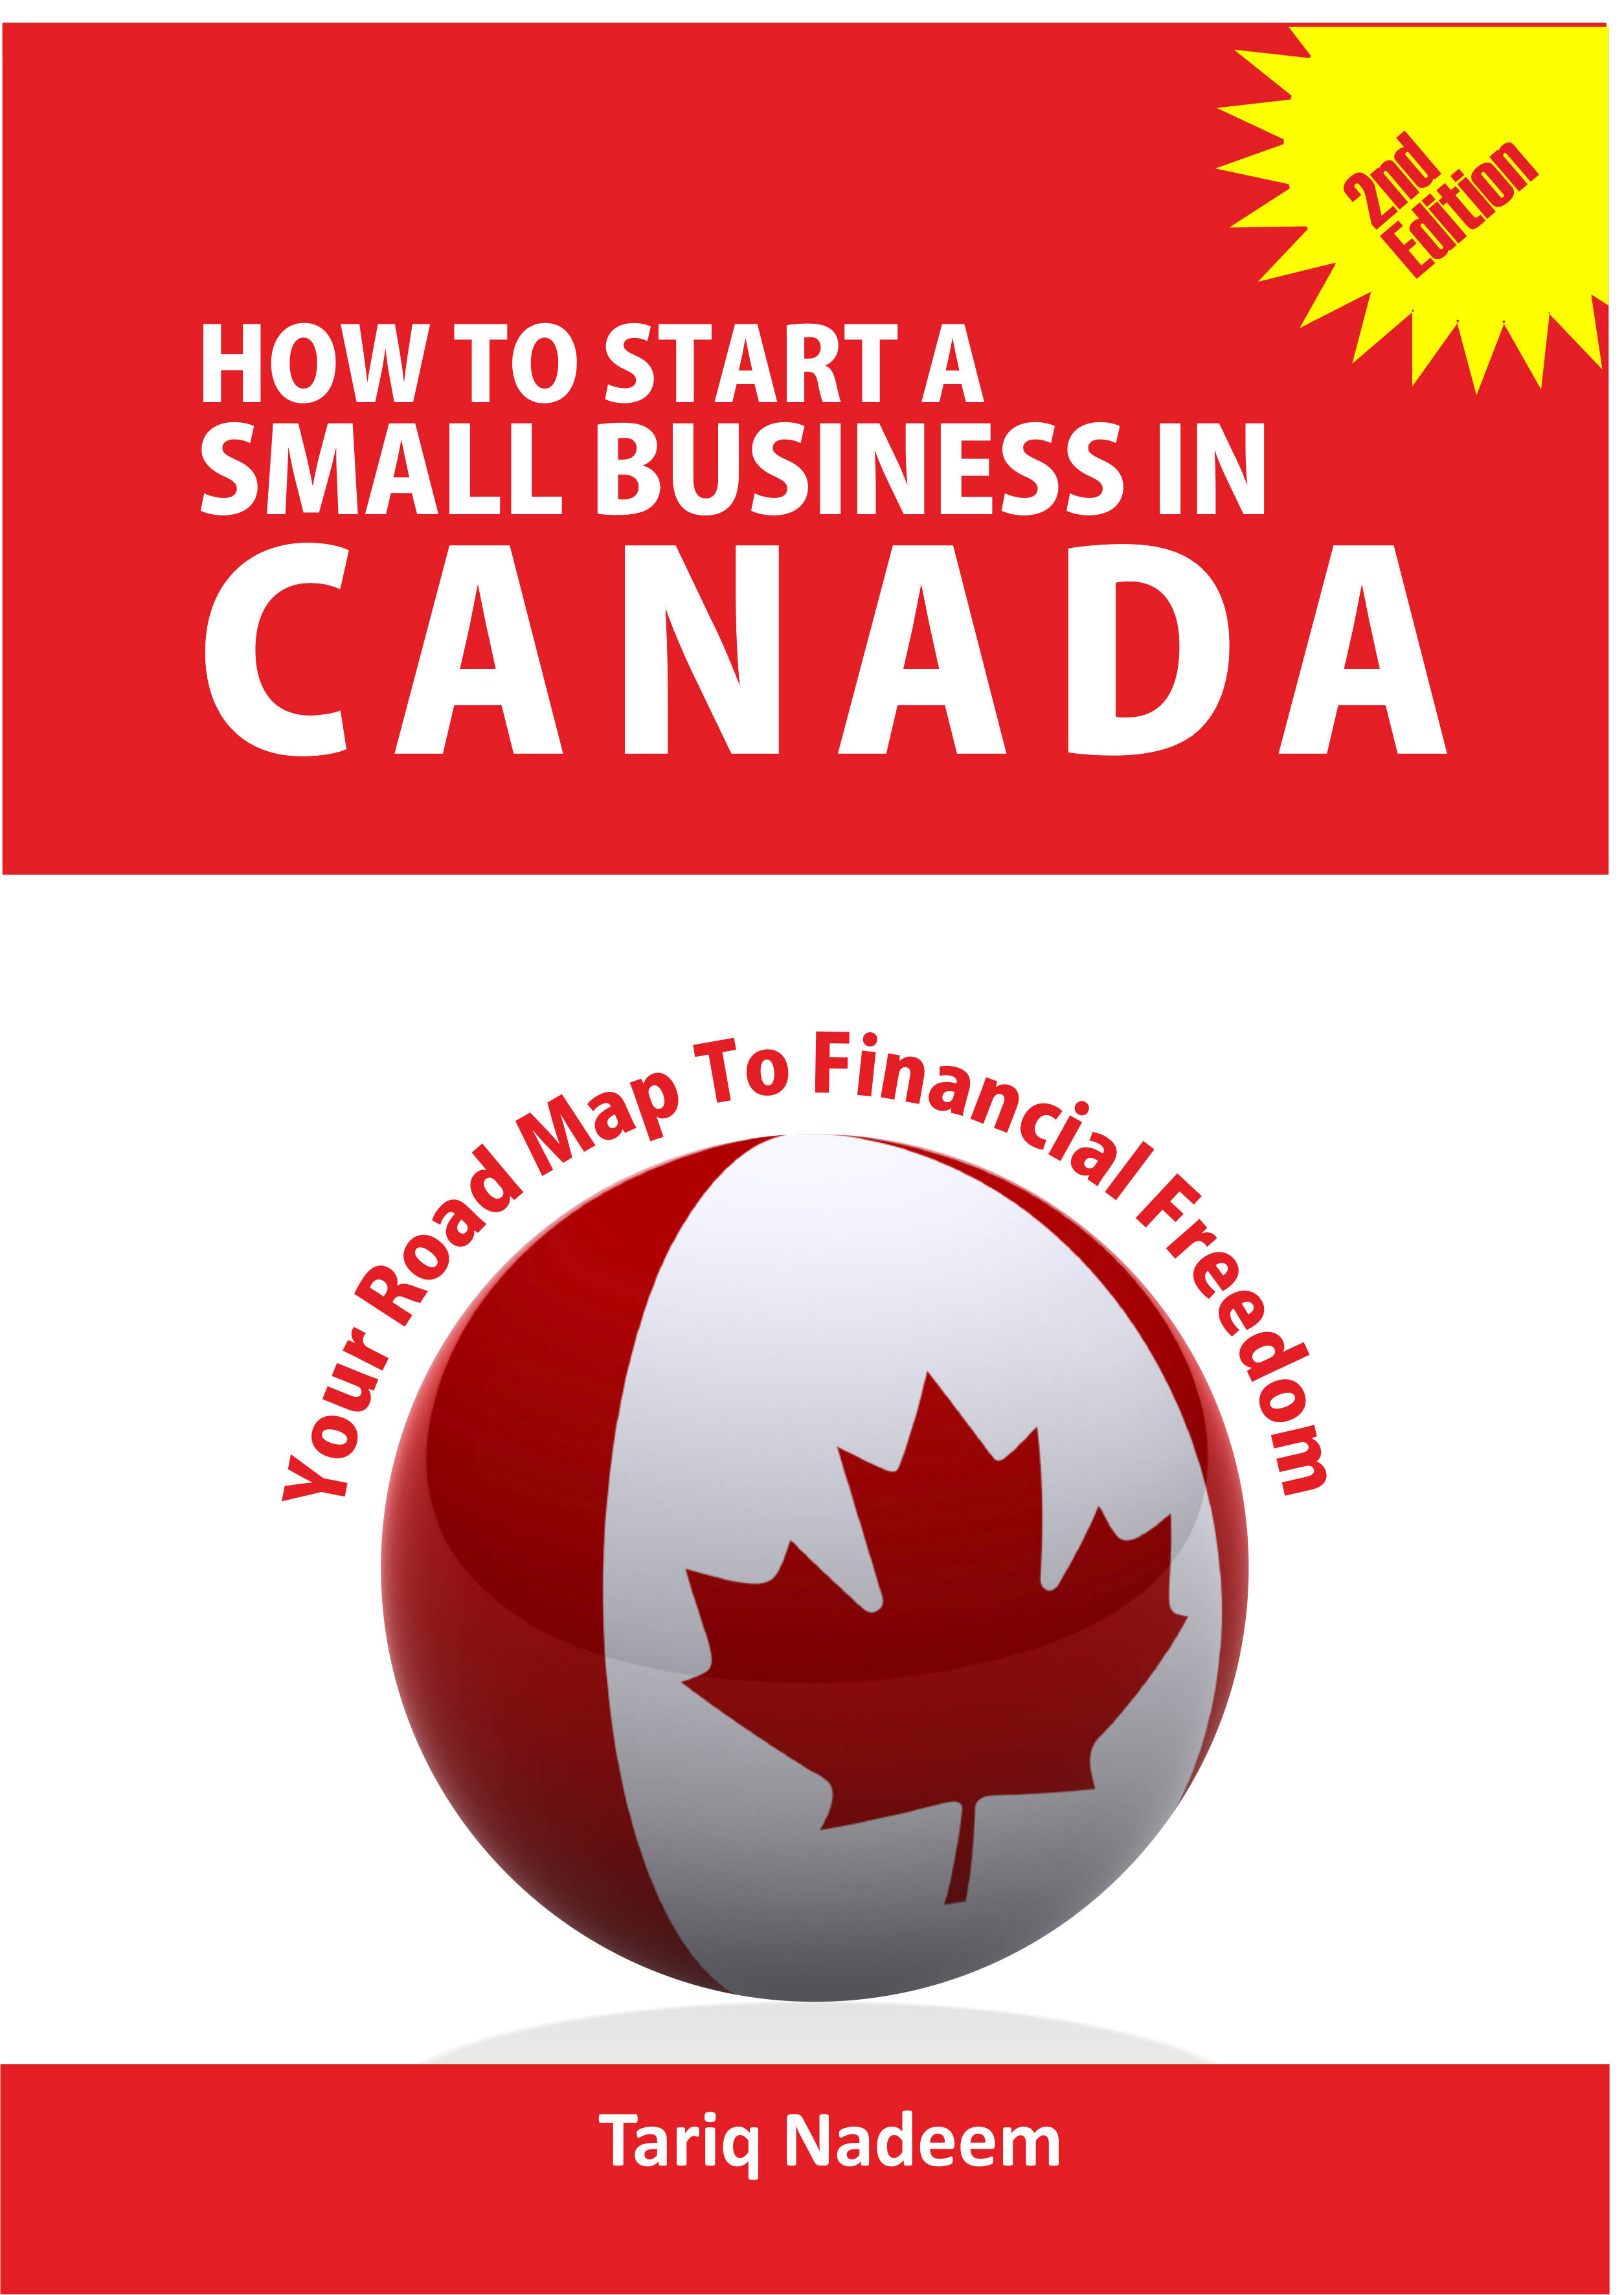 How To Start A Small Business in Canada - 2nd Edition